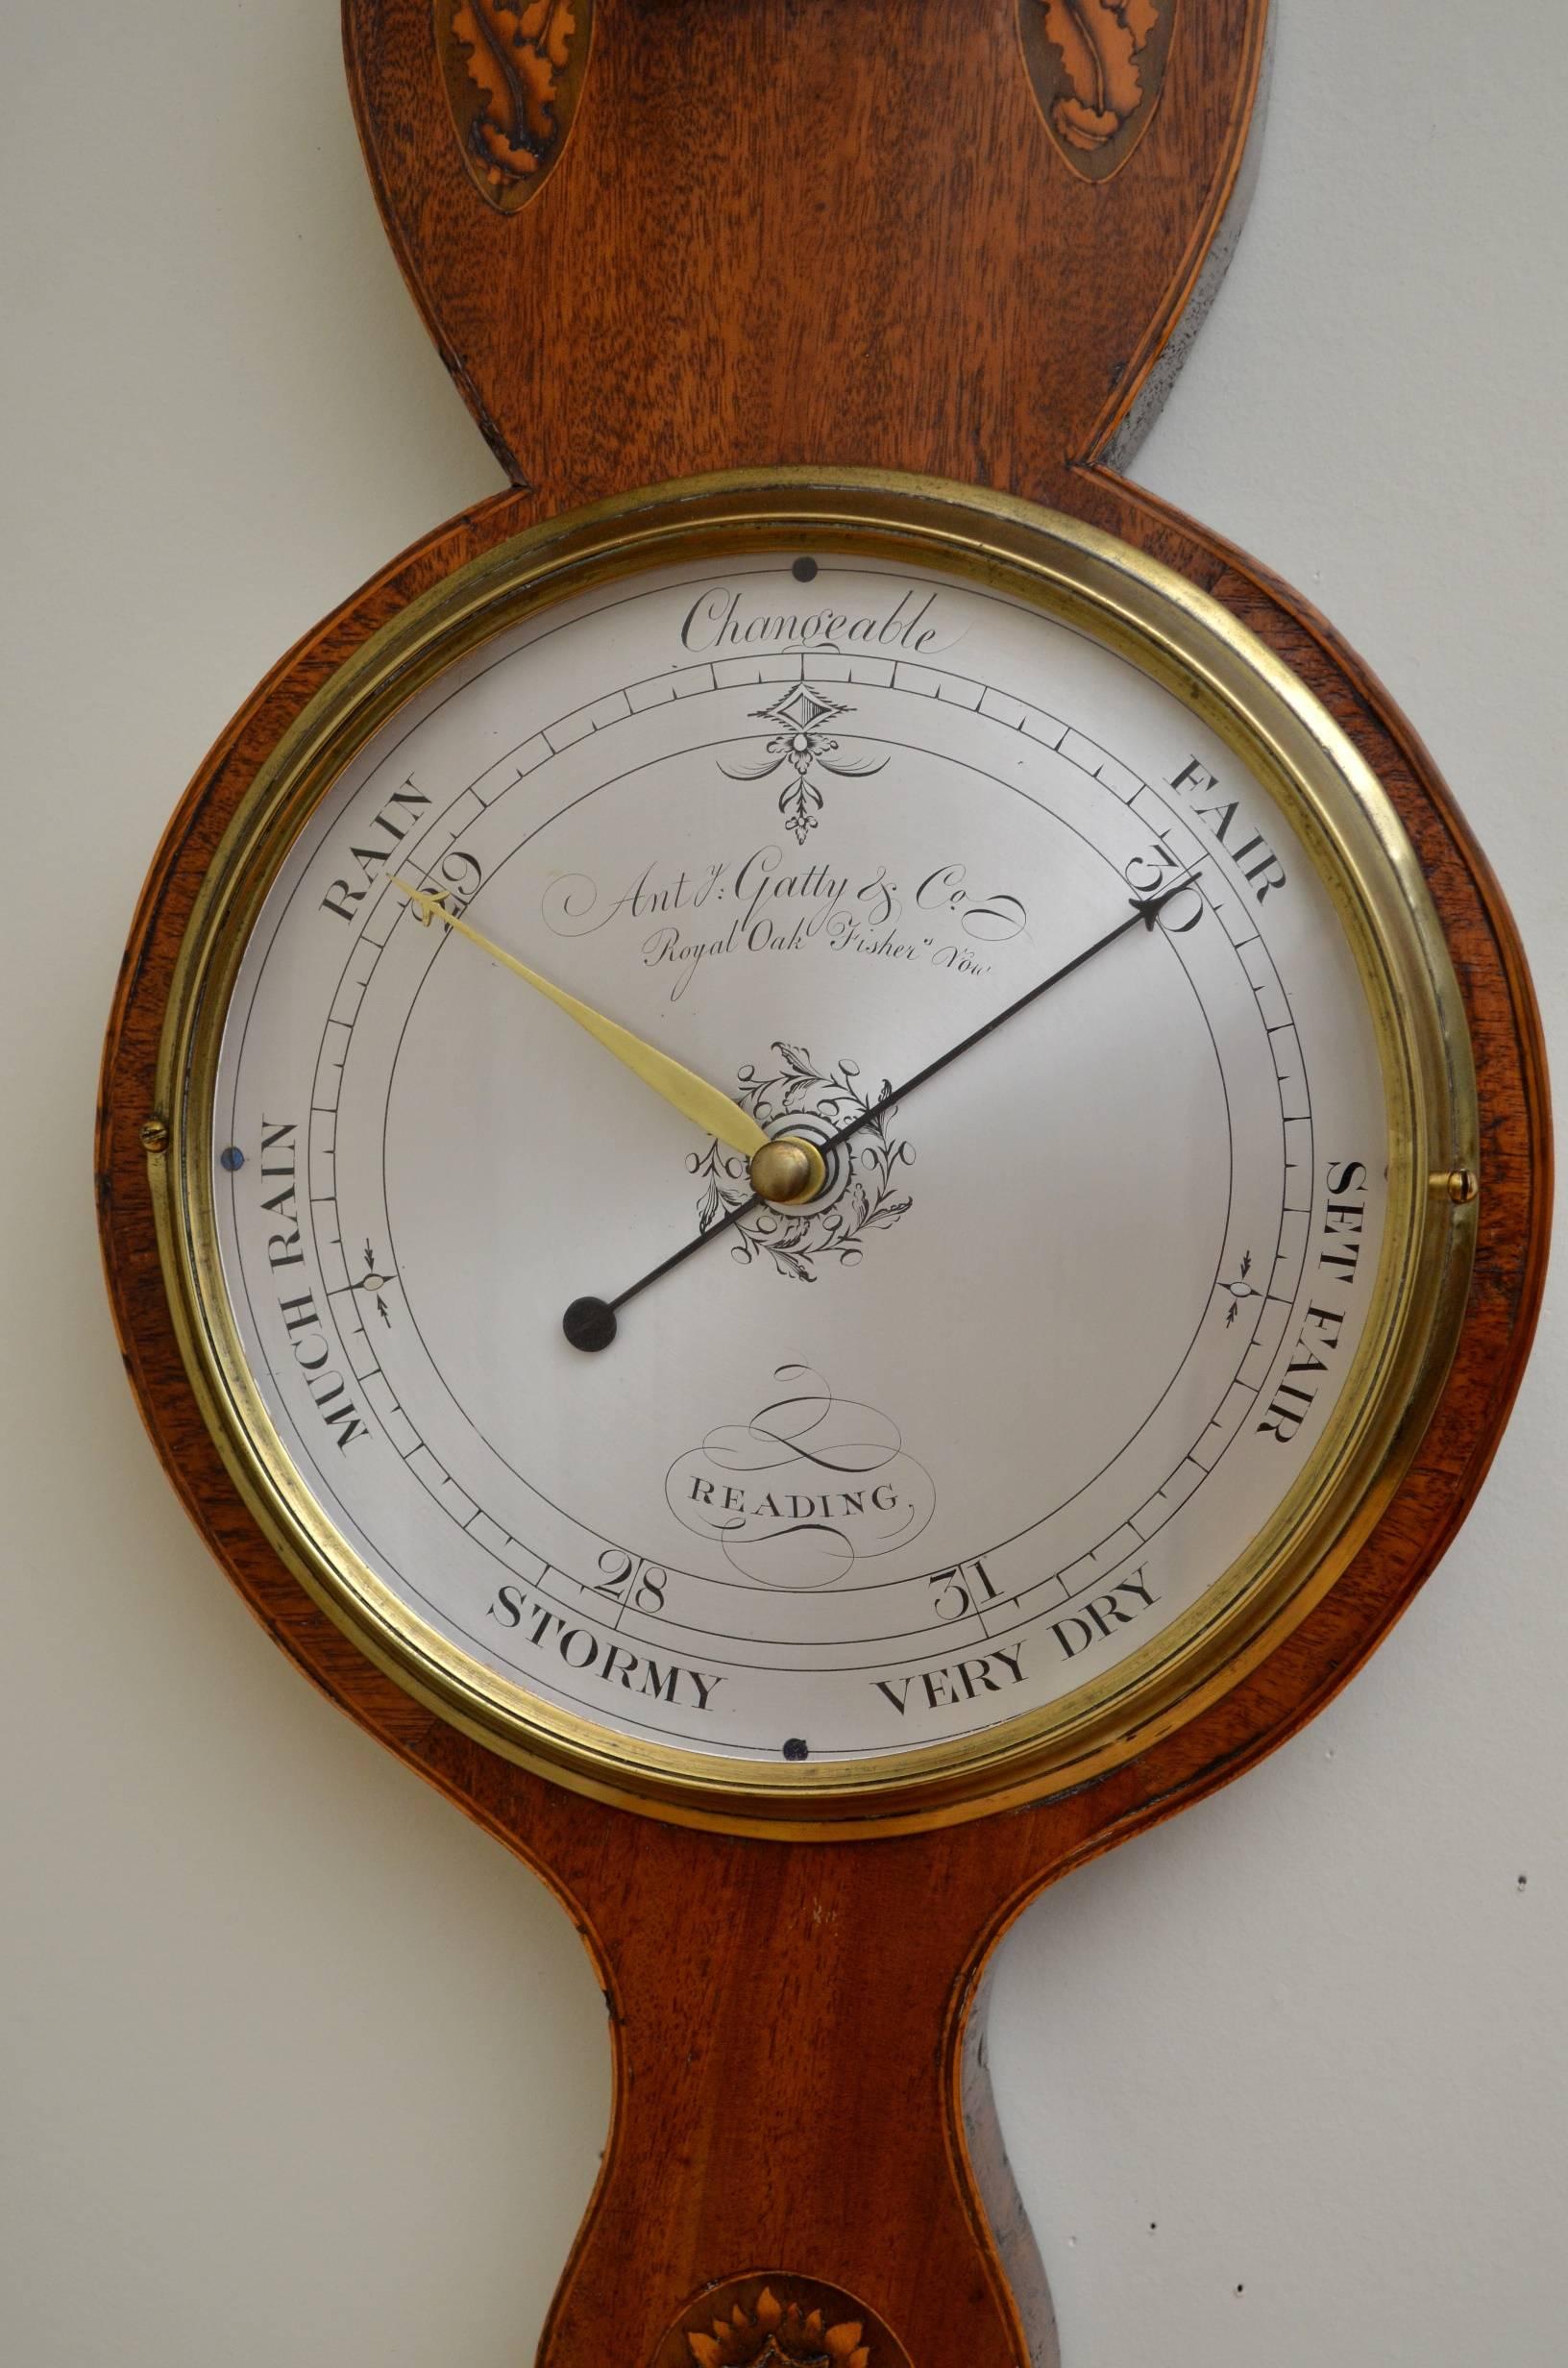 Fine Quality Regency Wheel Barometer A. Gatty In Good Condition For Sale In Whaley Bridge, GB